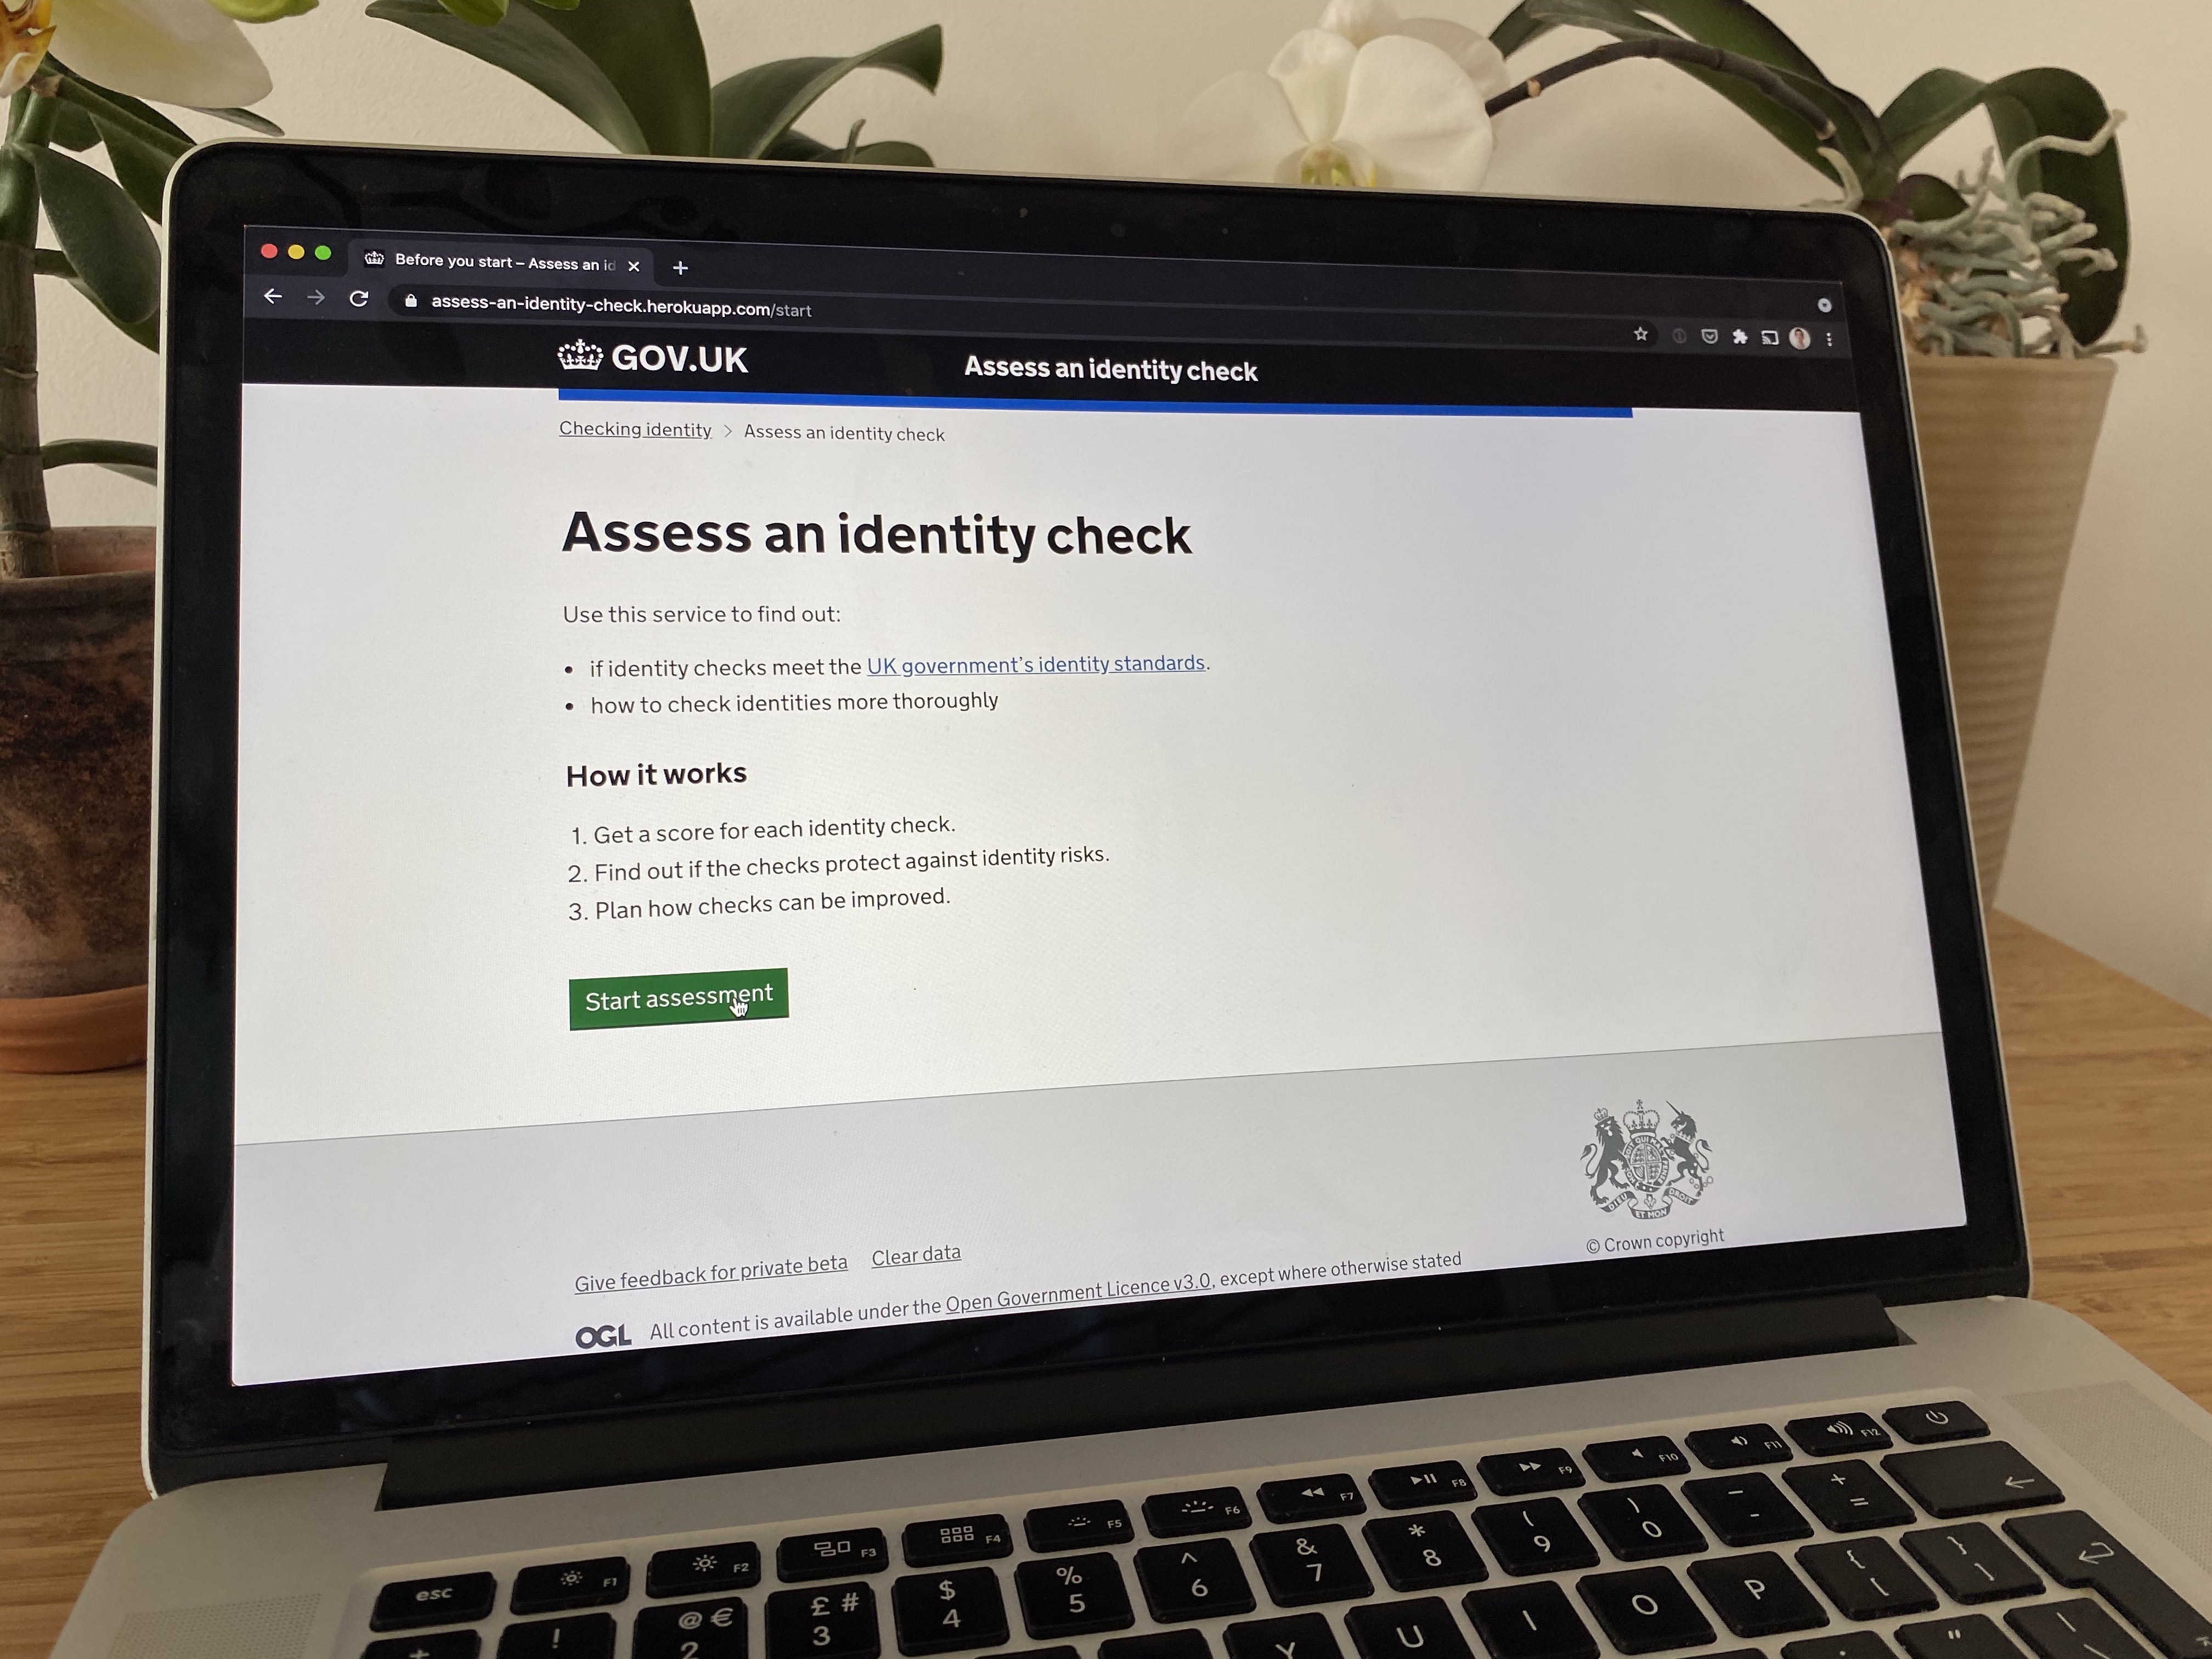 The start page for the identity check assessment tool